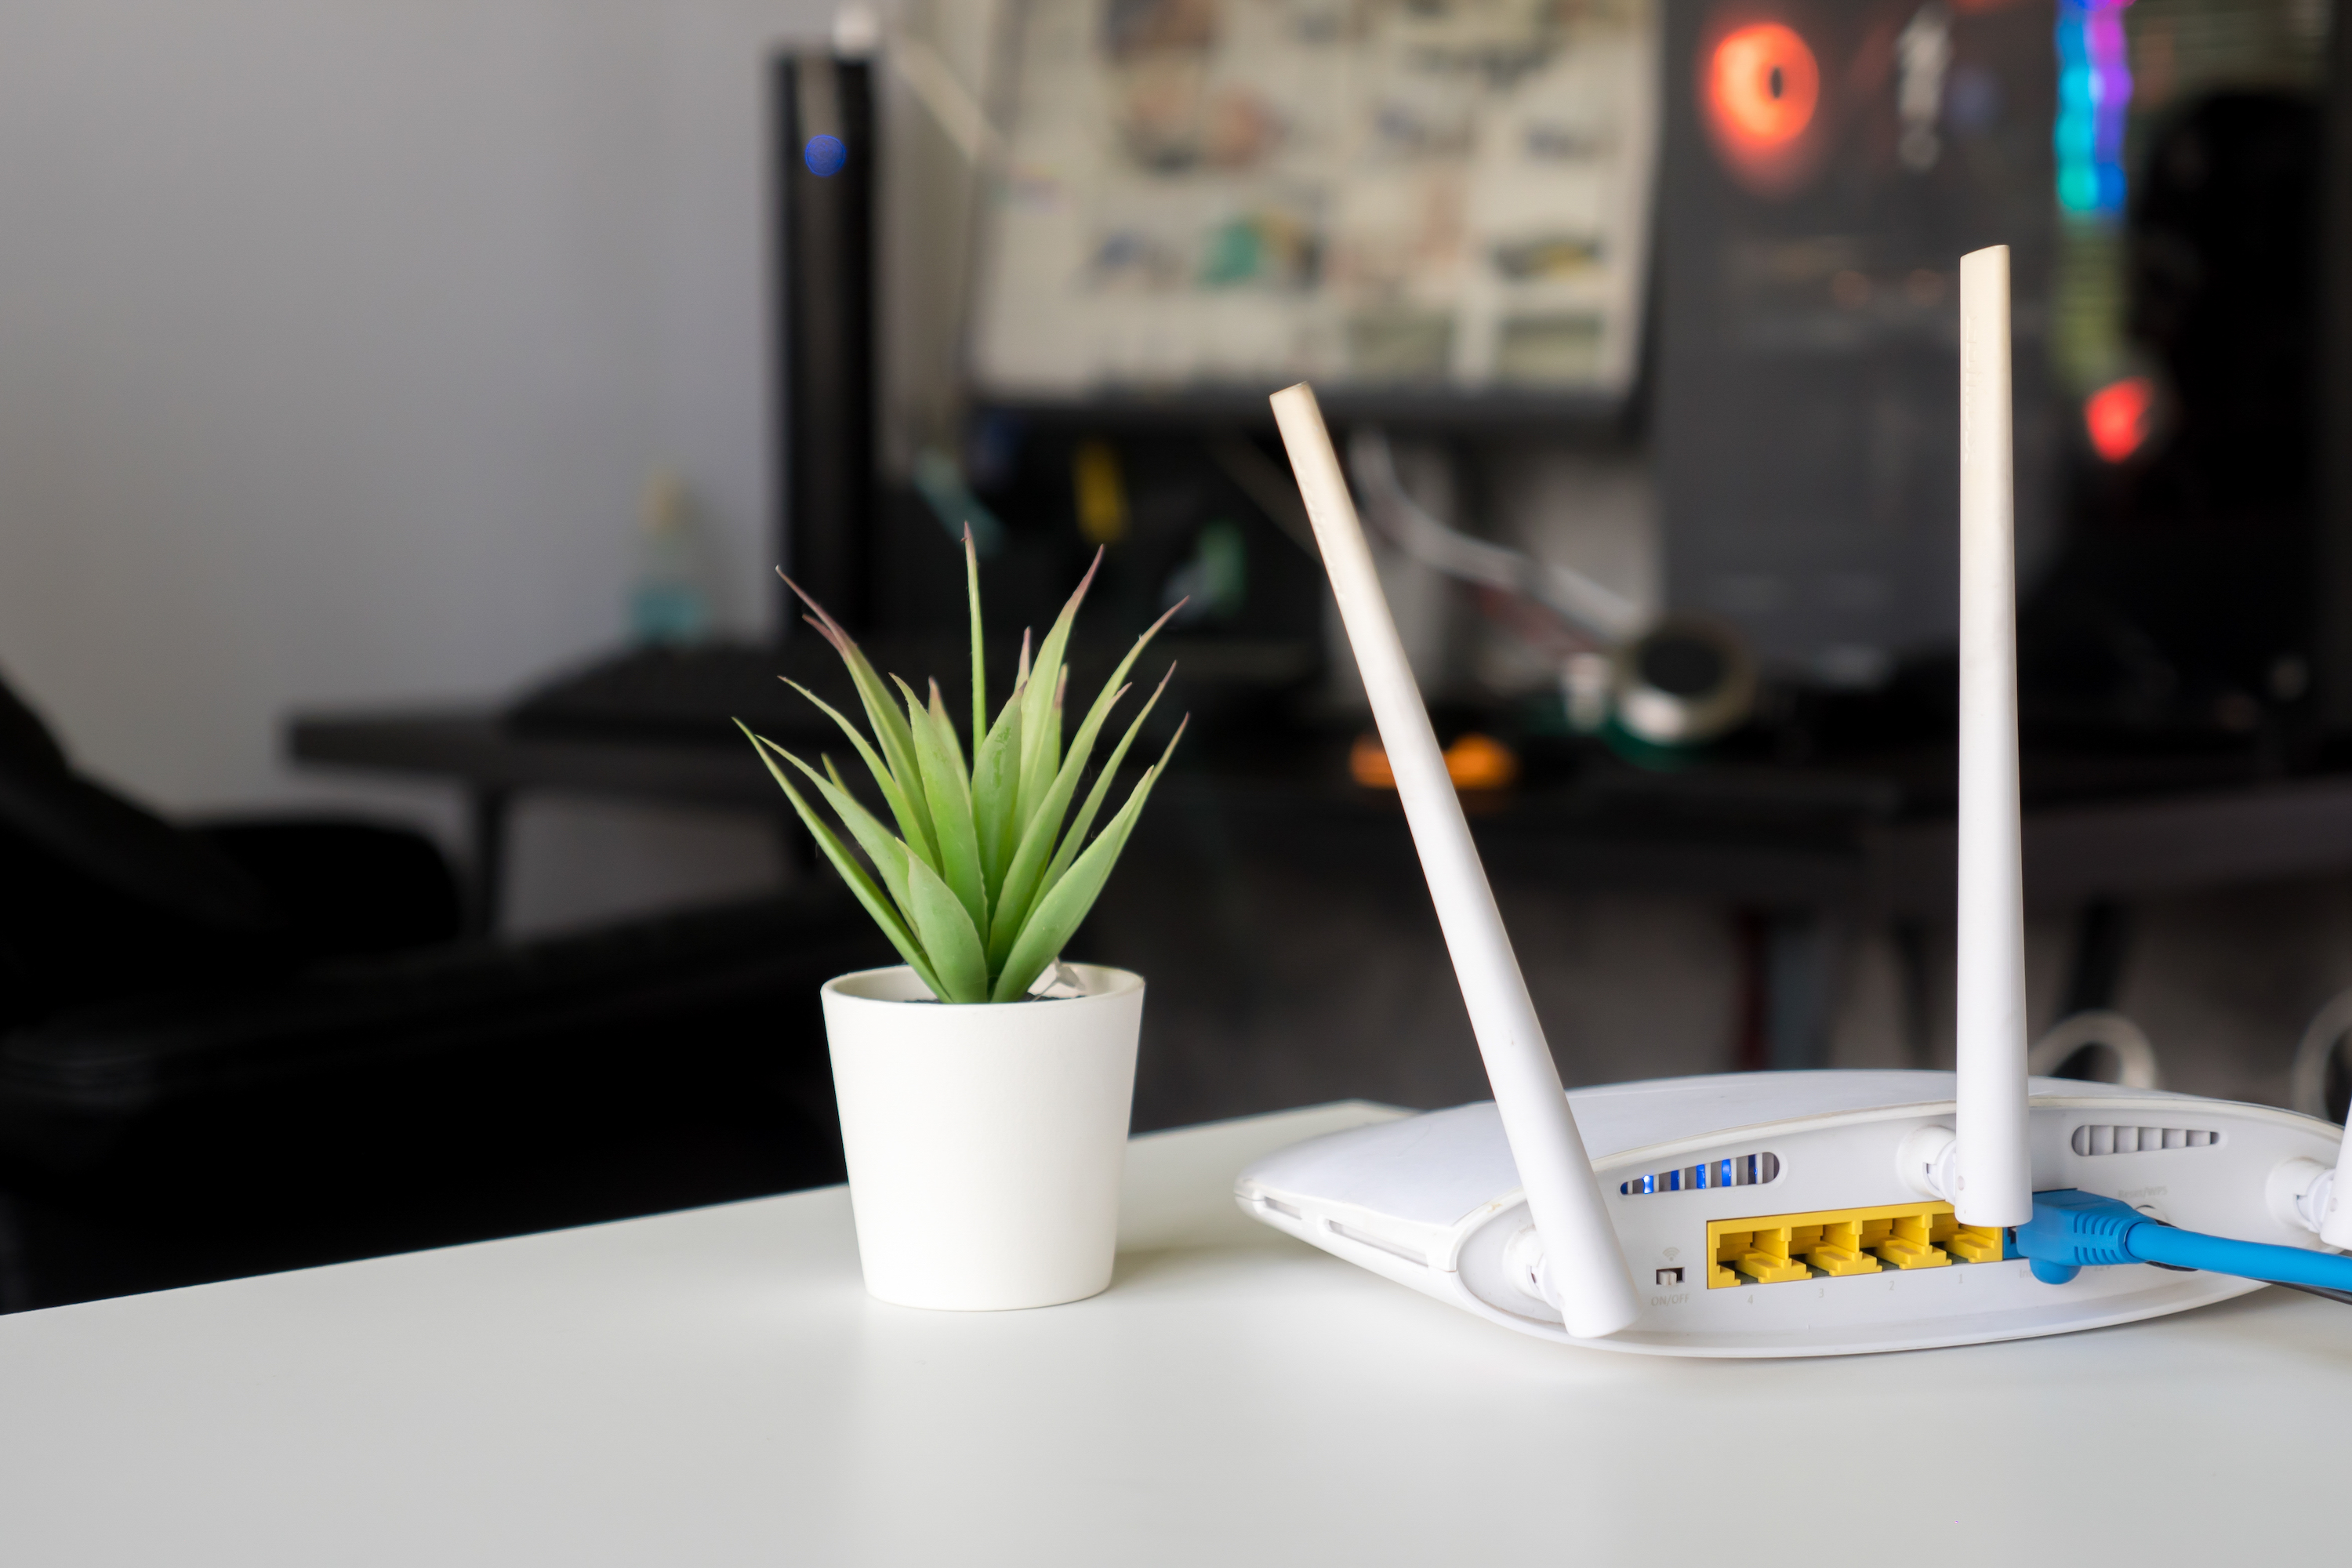 router on desk with plant